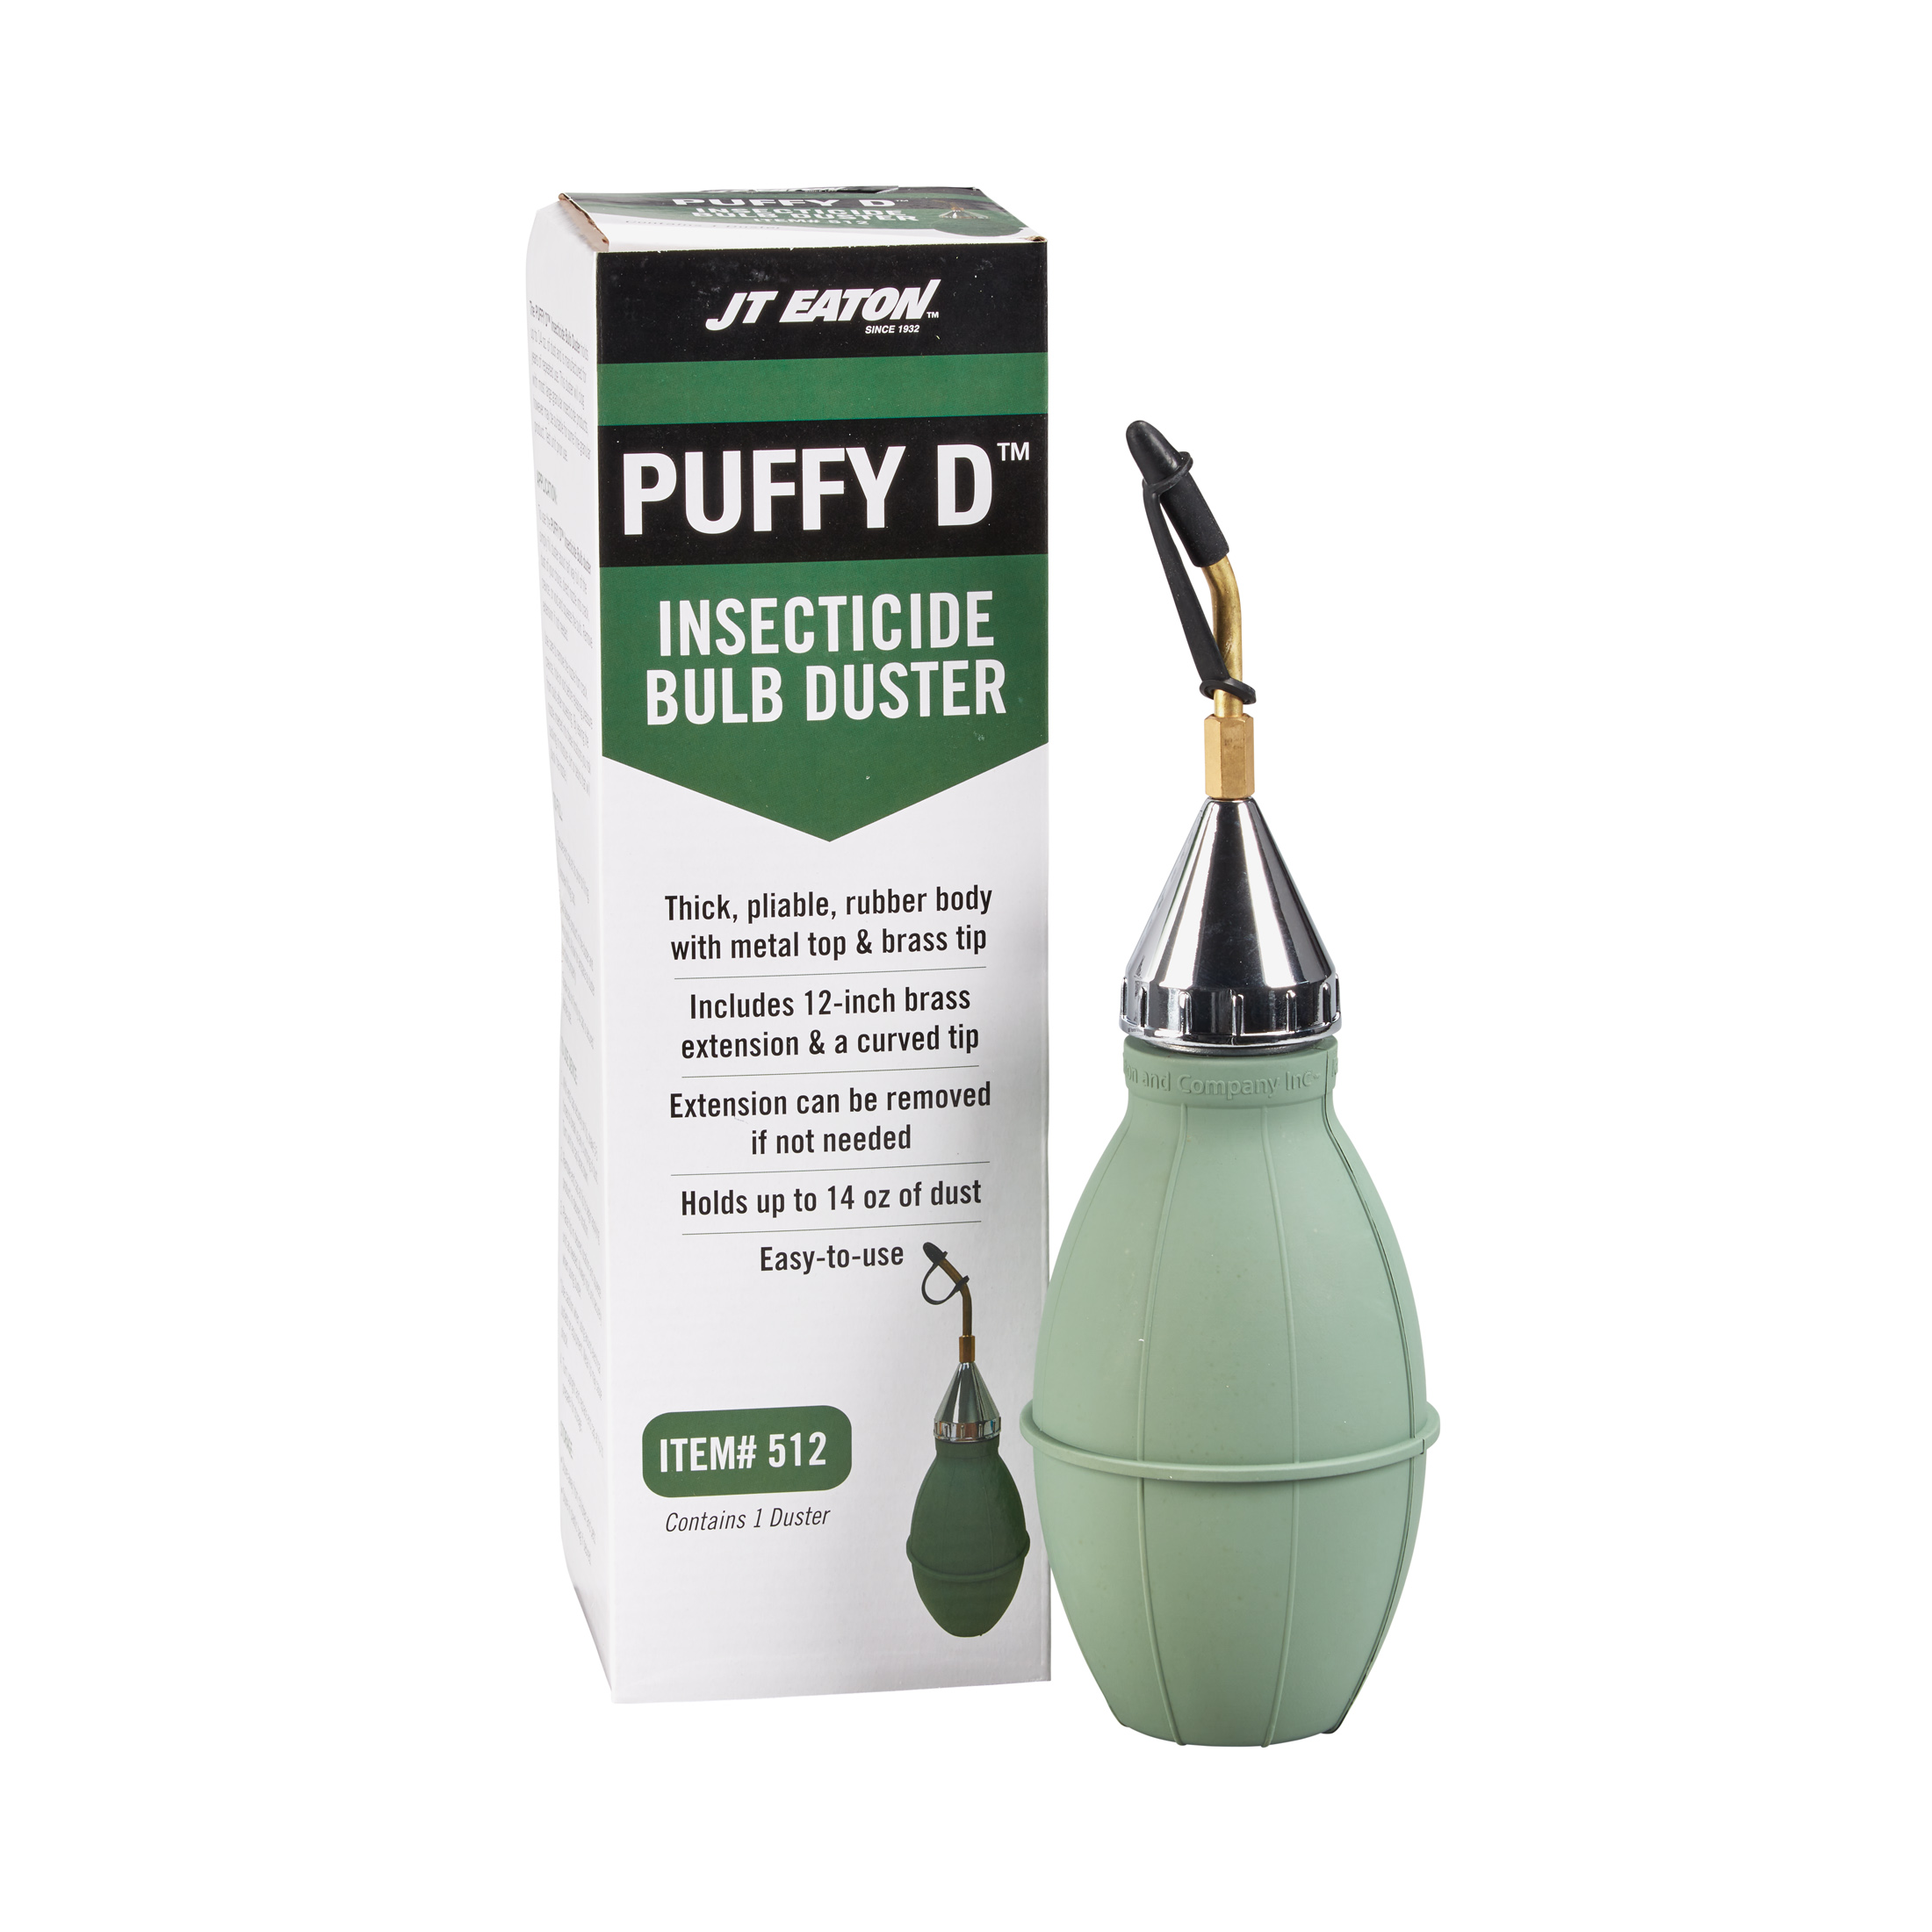 PUFFY D Insecticide Duster